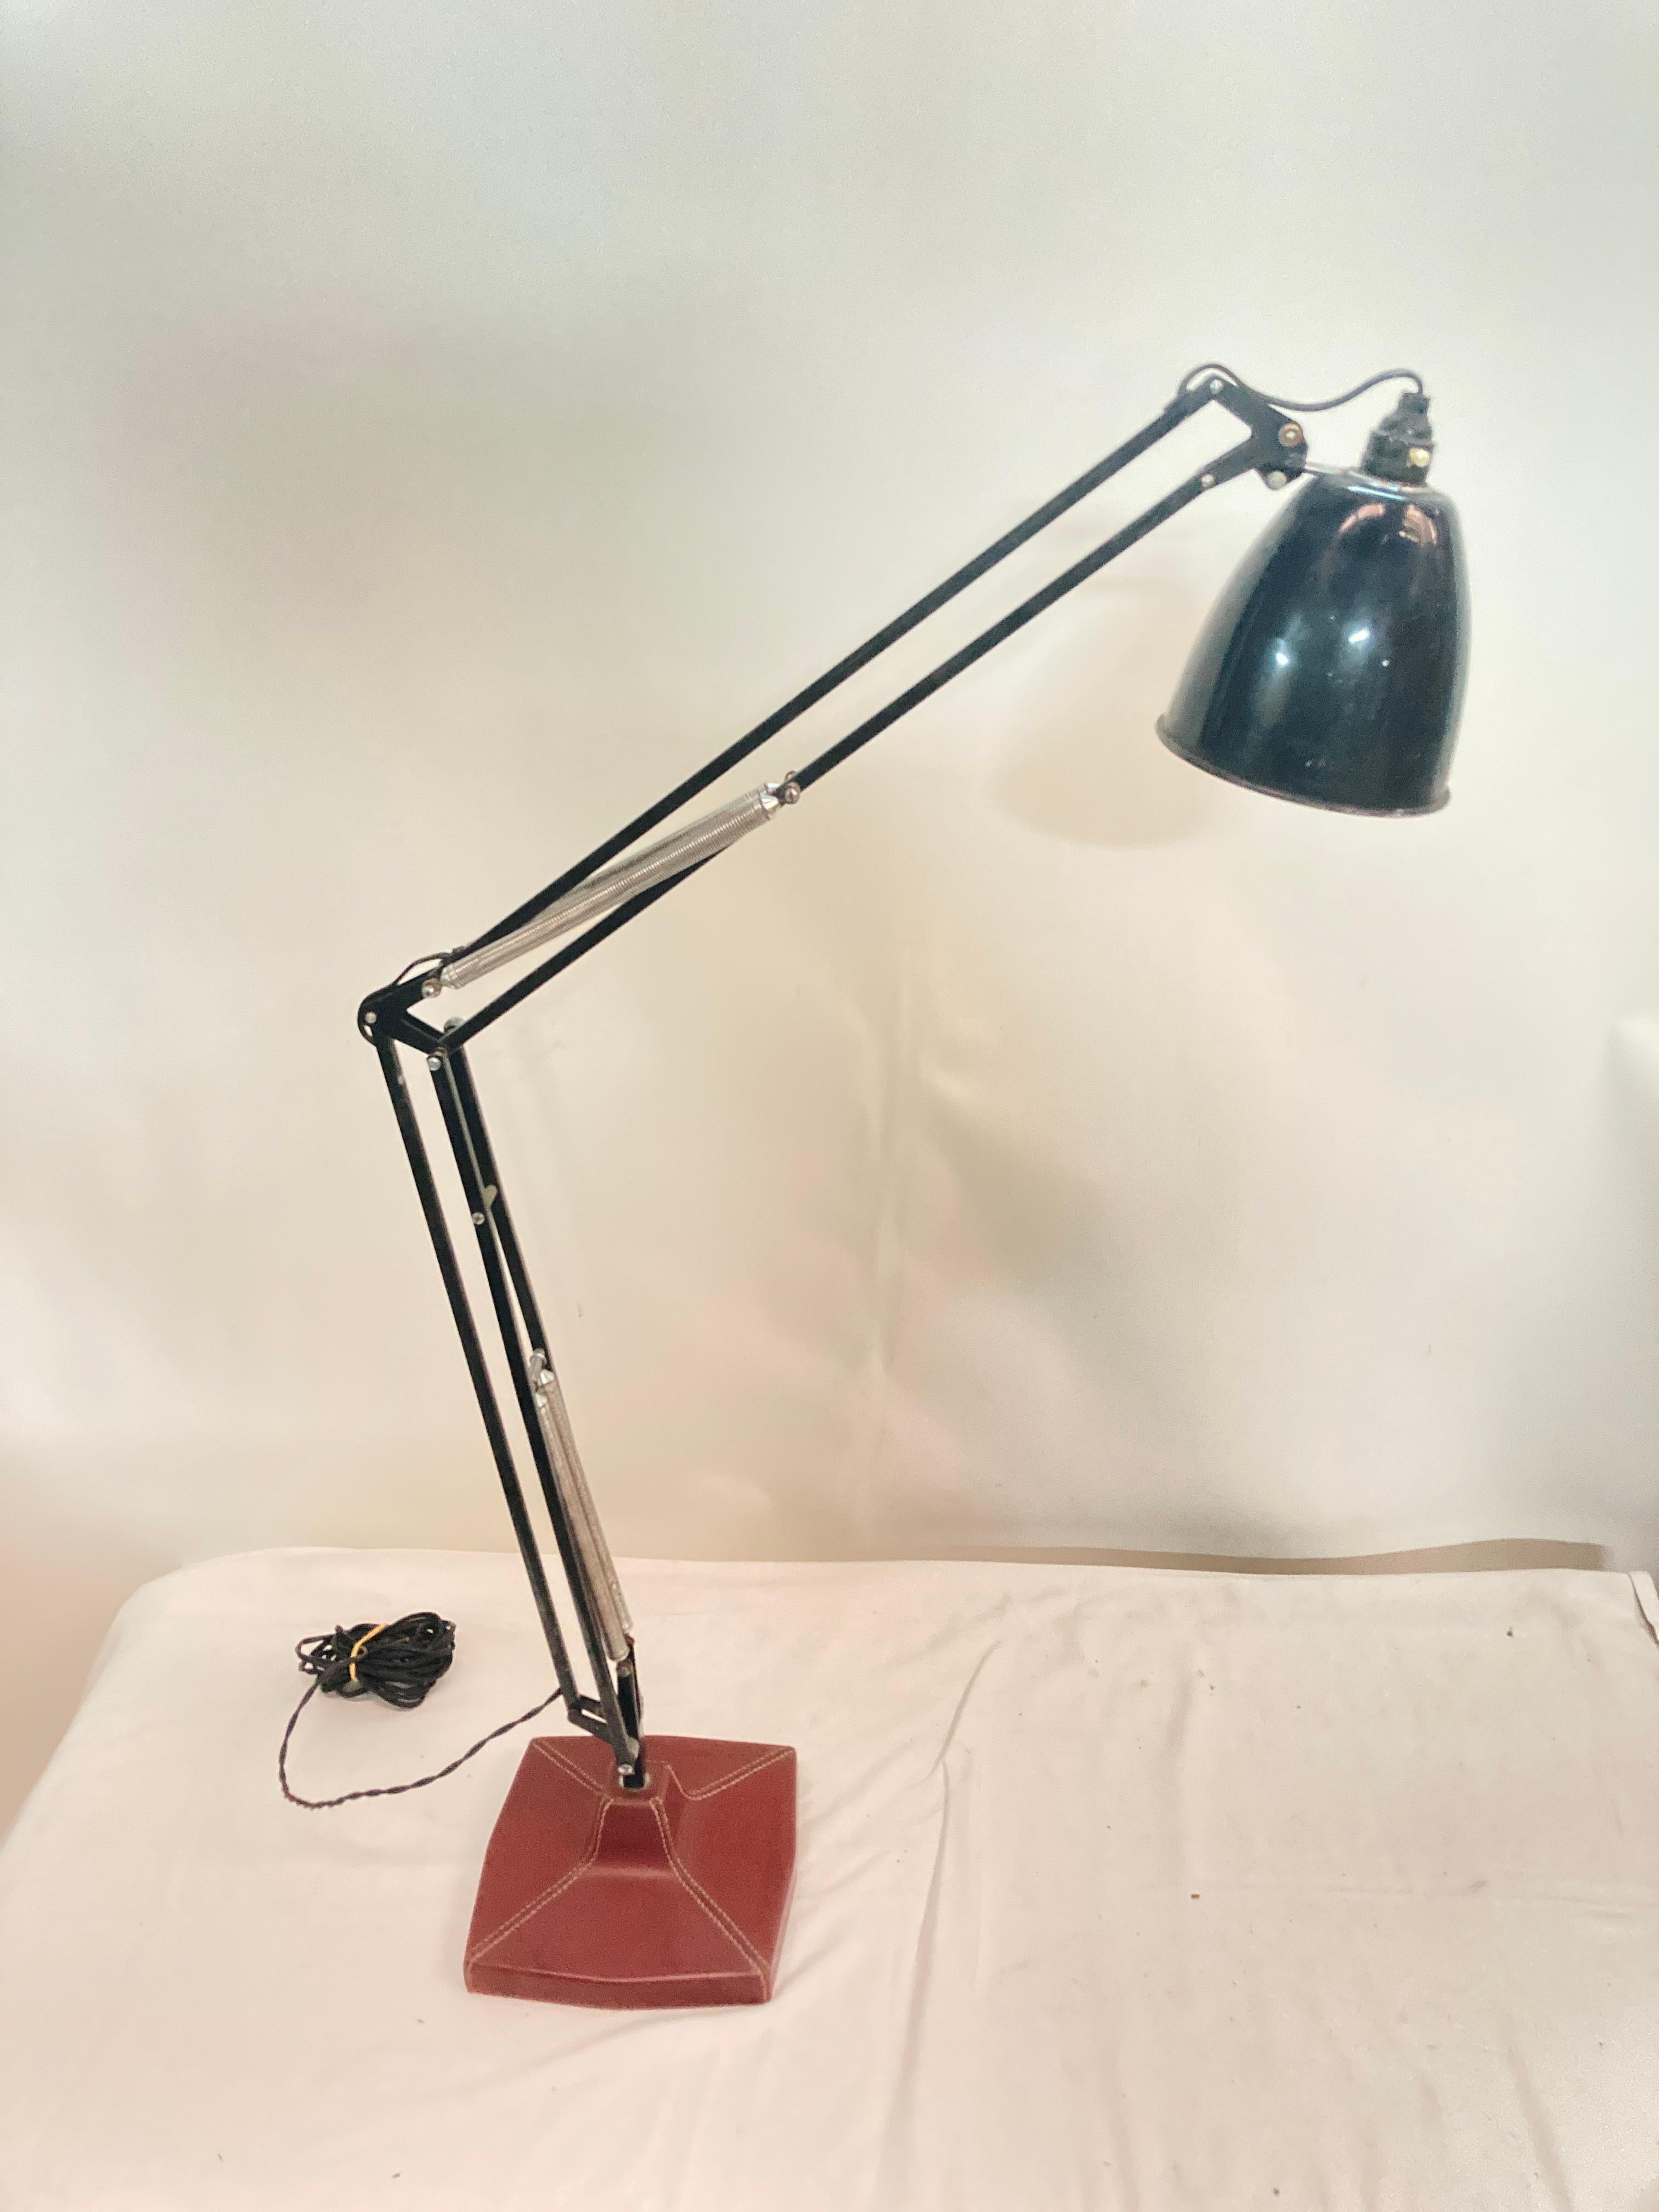 Very nice architect lamp by Anglepoise and Hermès
Good vintage condition
1960's